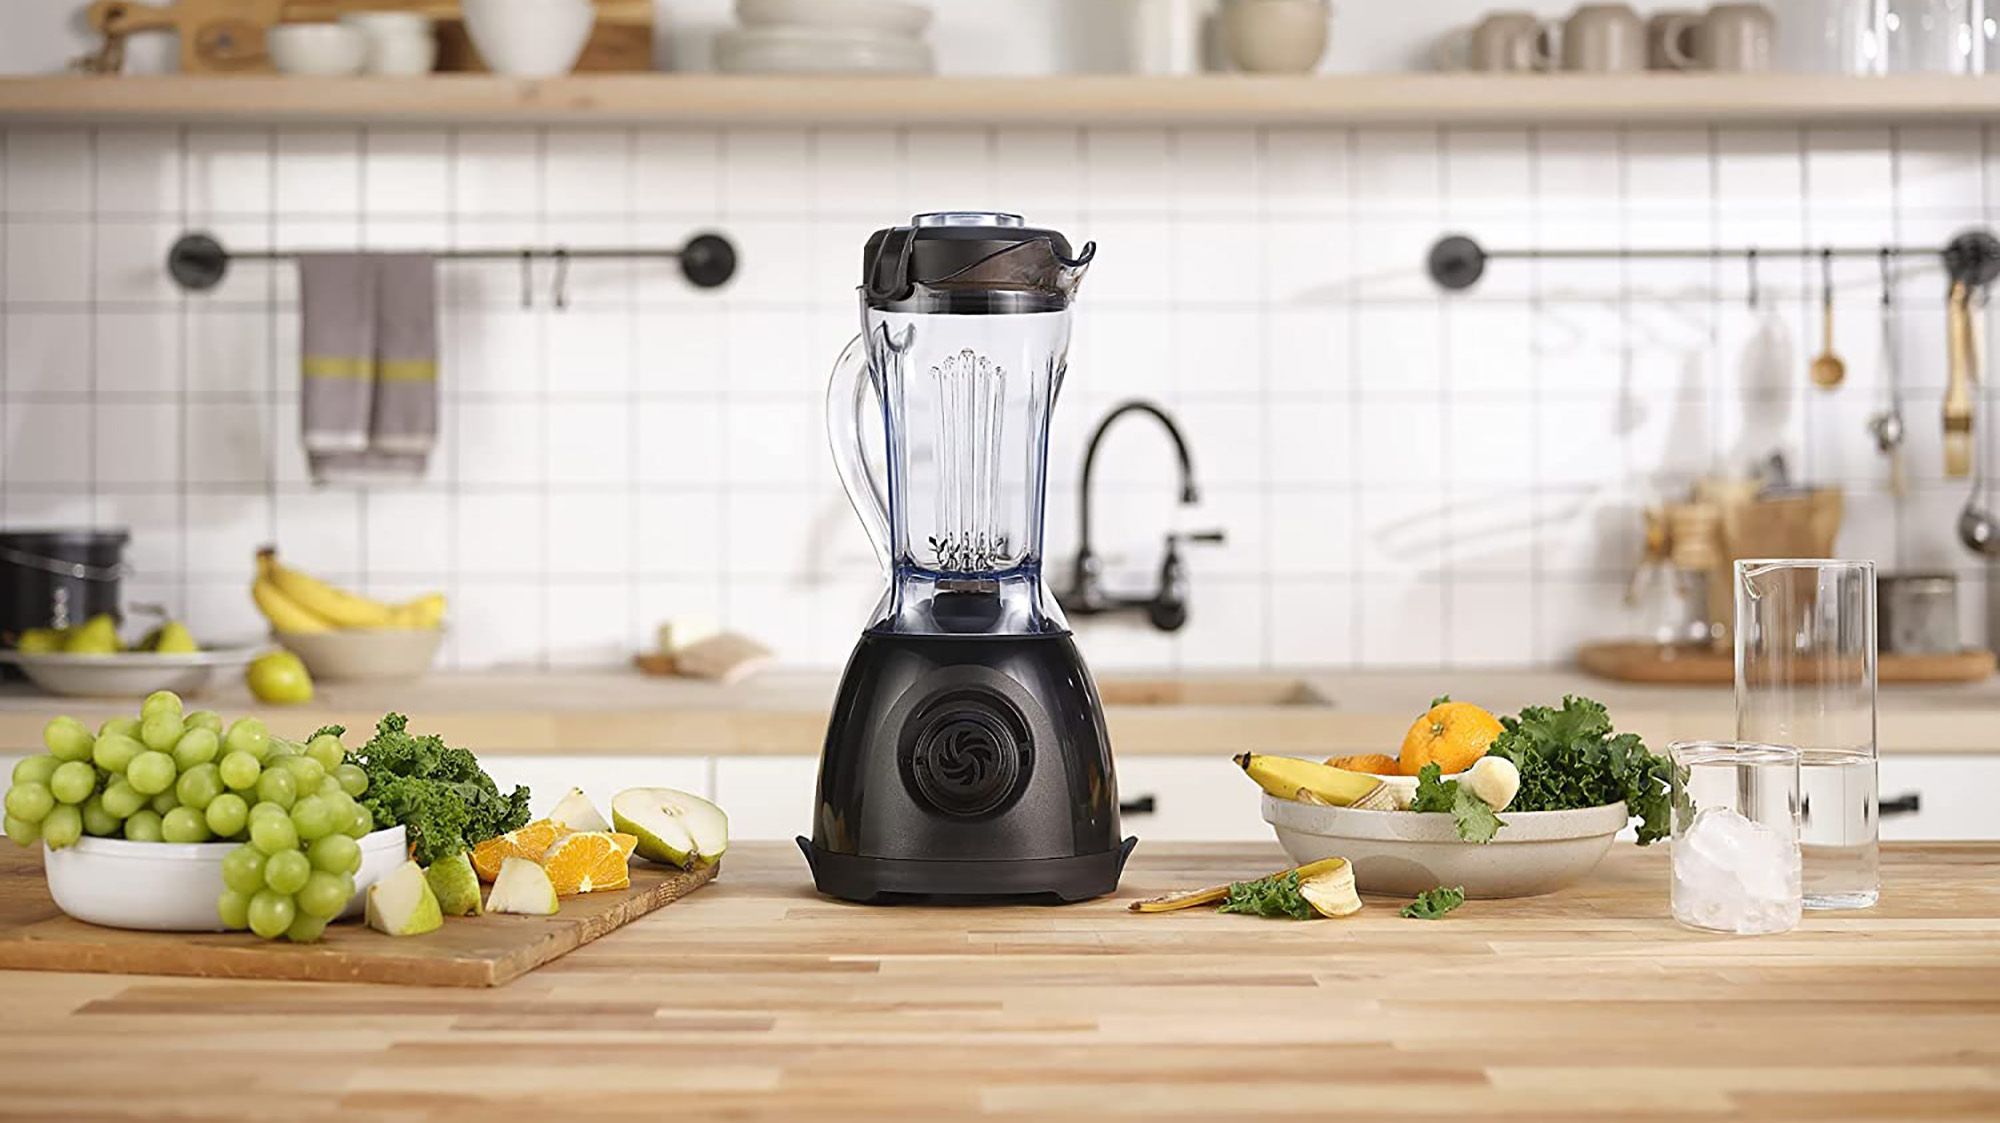 This Vitamix Blender Is $250 Off During 's Black Friday Sale